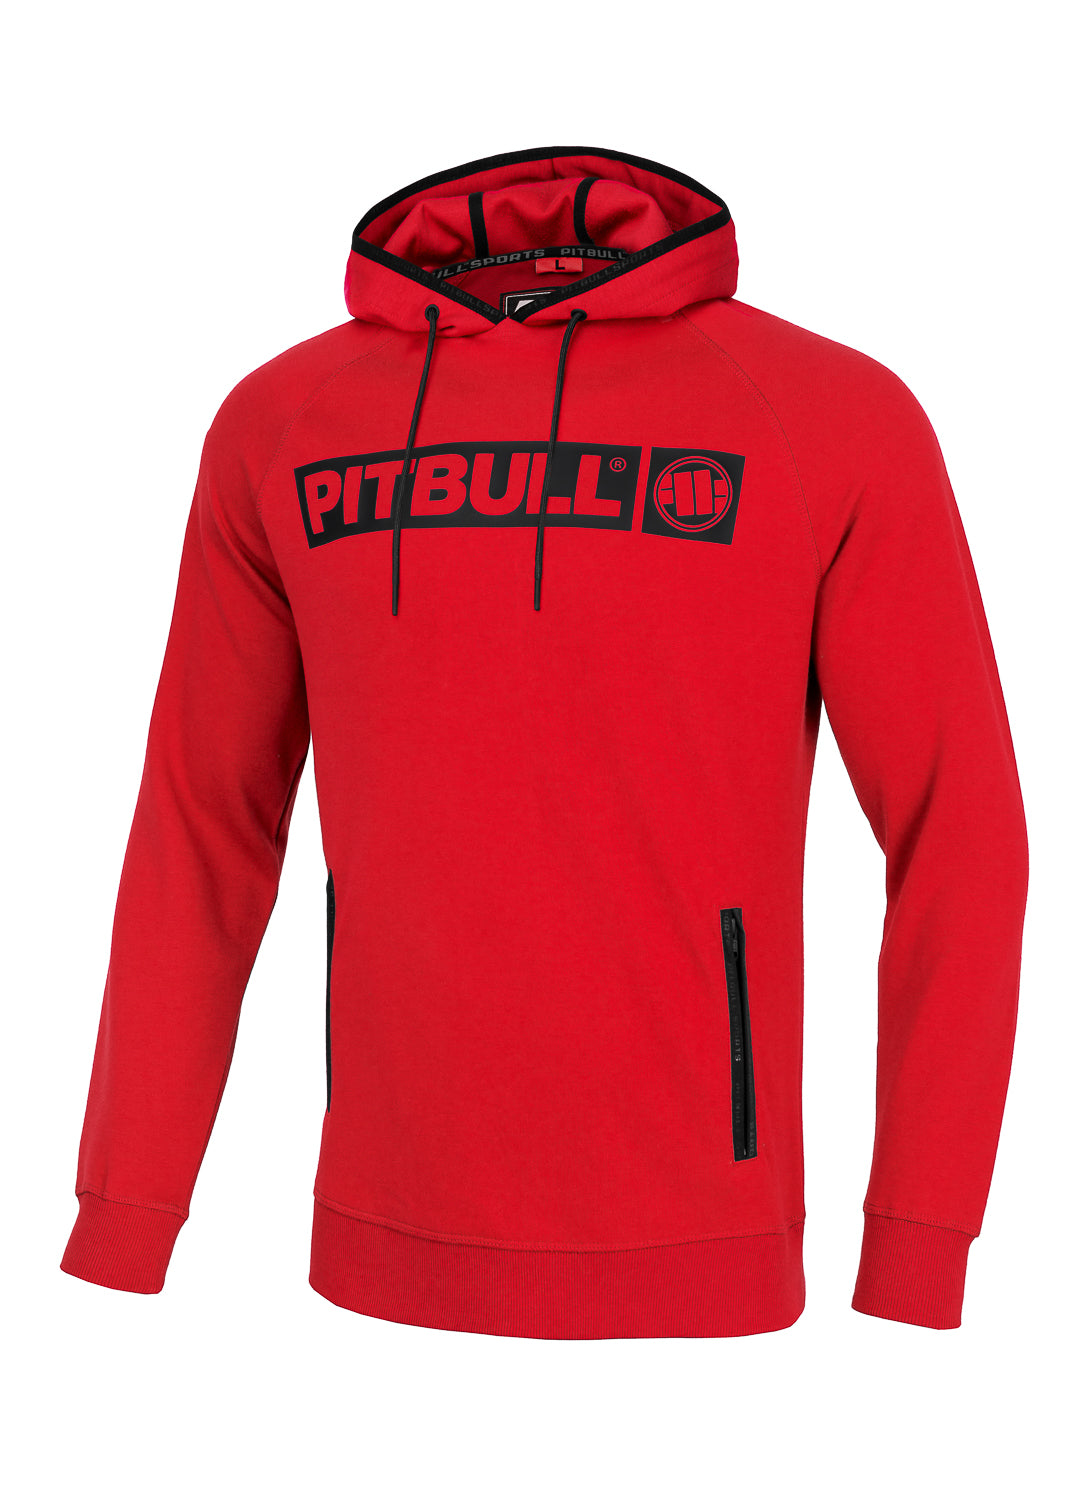 FALCON HILLTOP Red Hoodie.